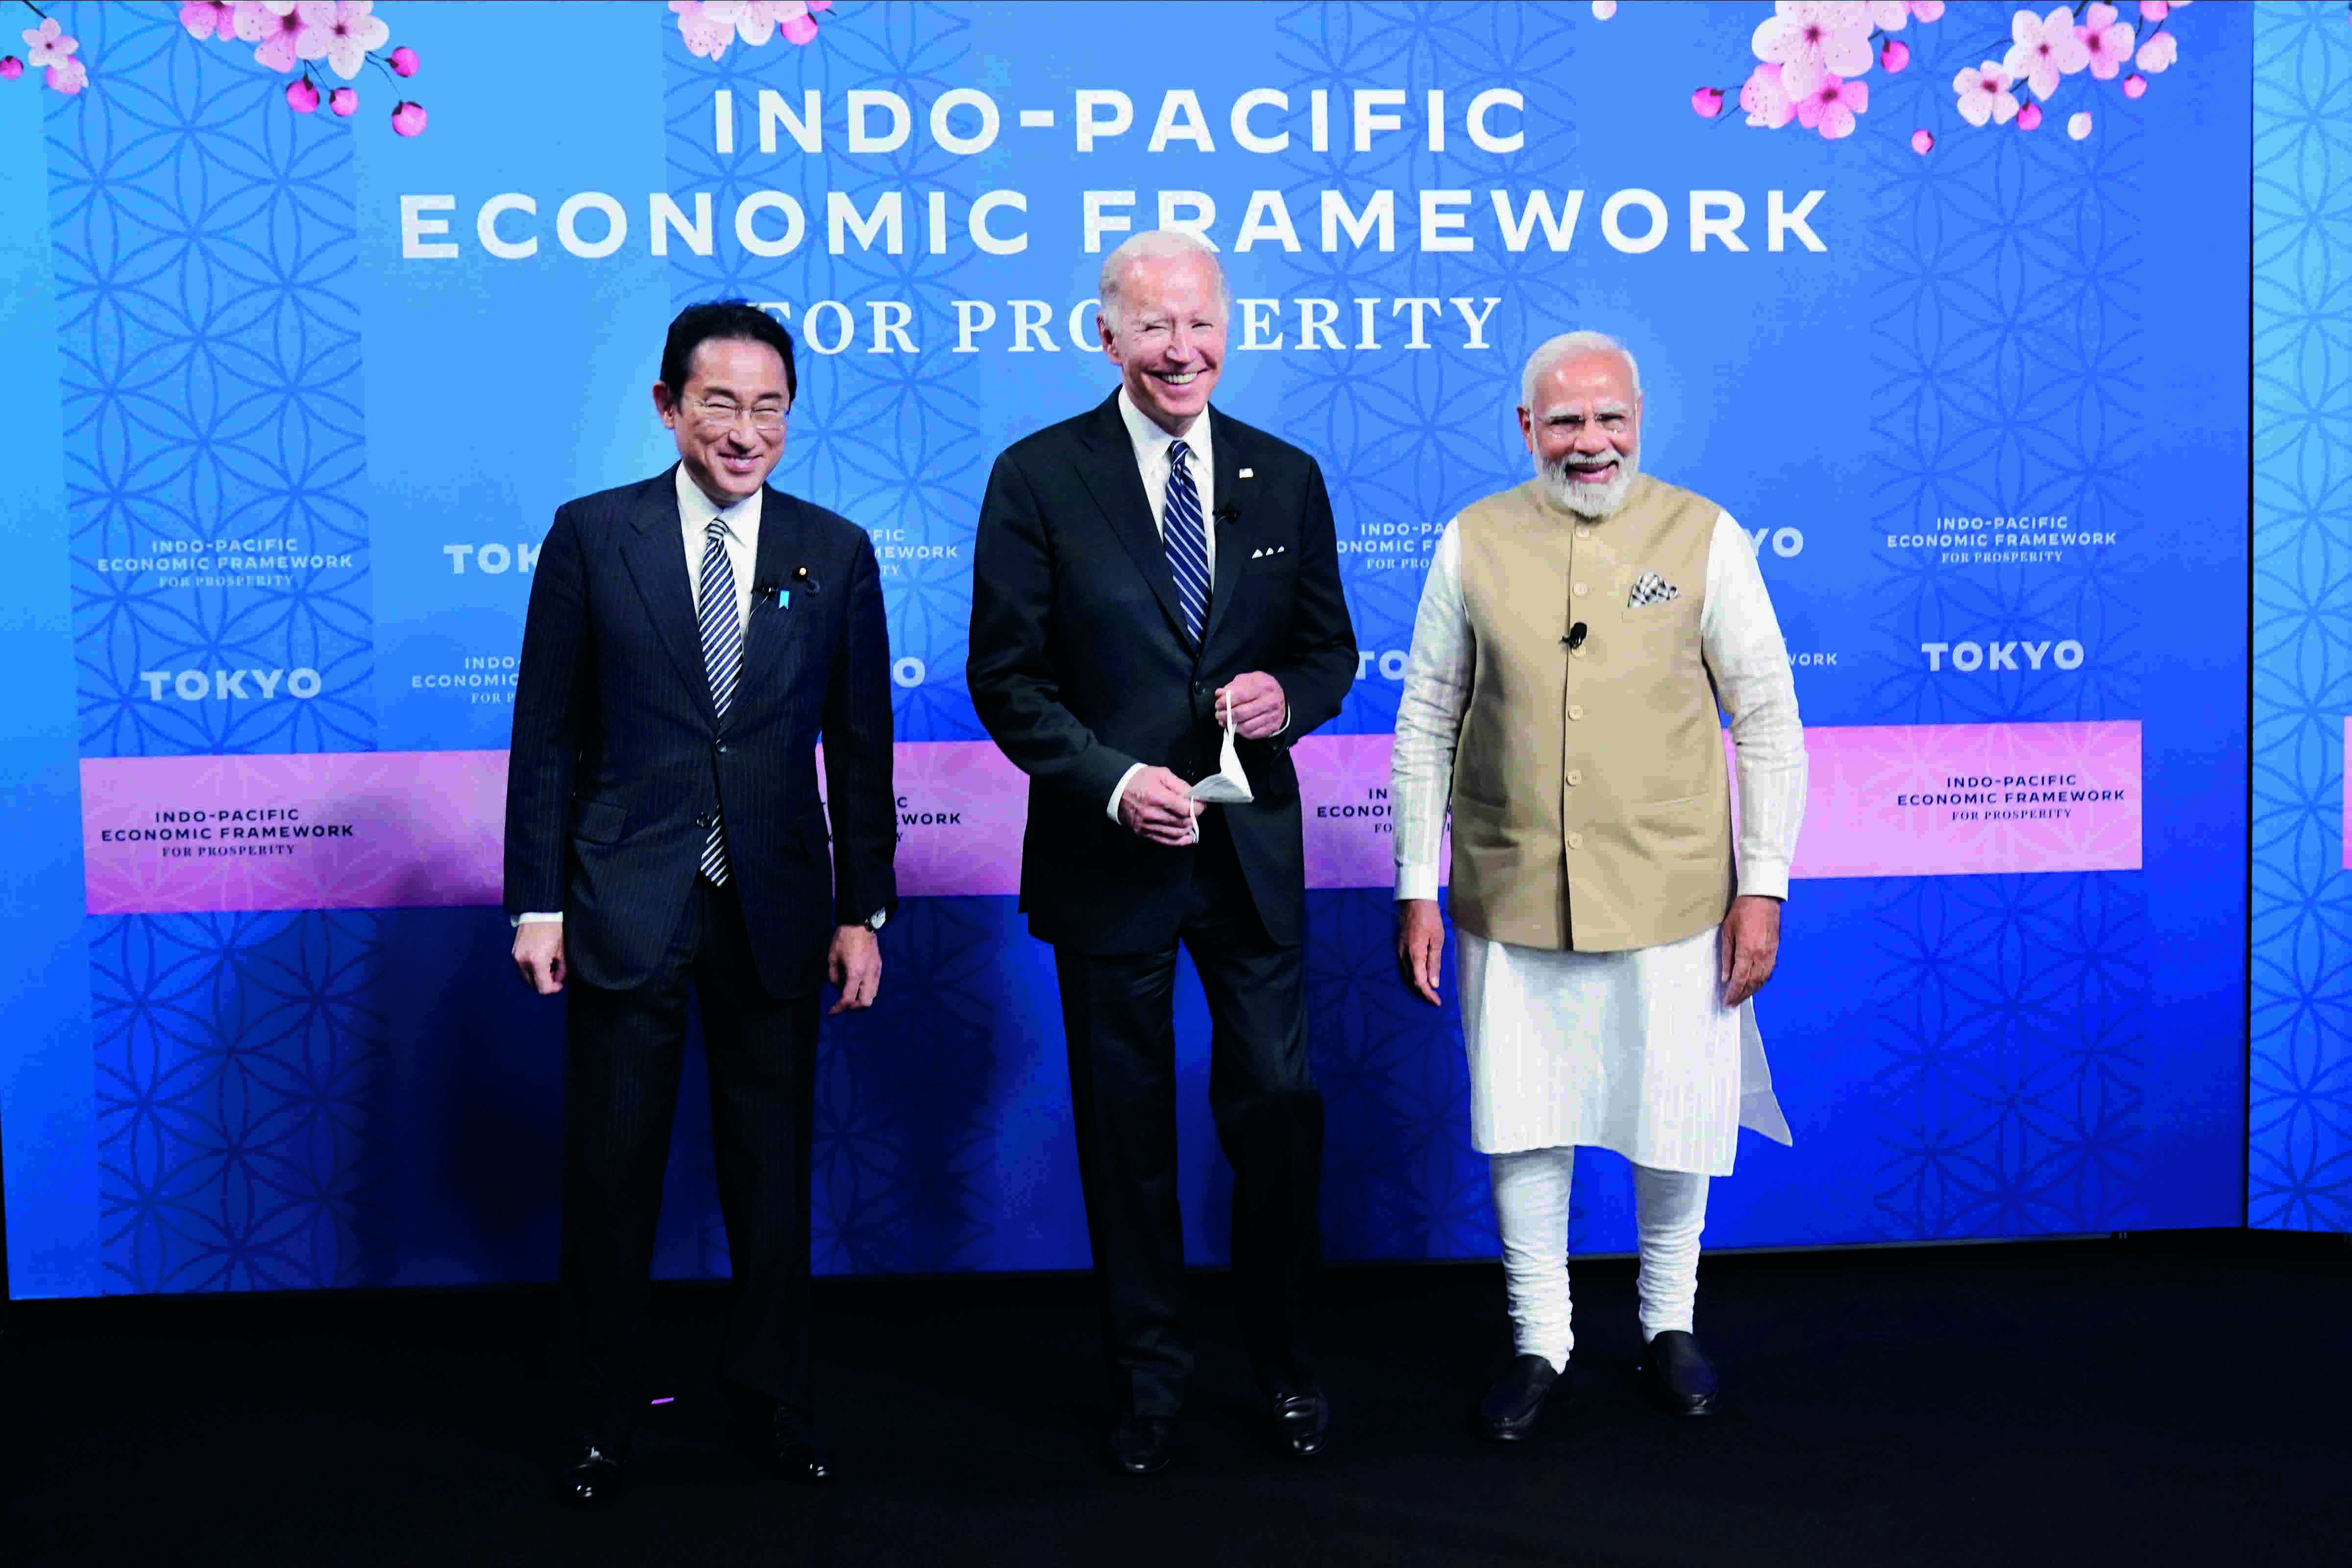 Biden launches Indo-Pacific trade deal, warns over inflation